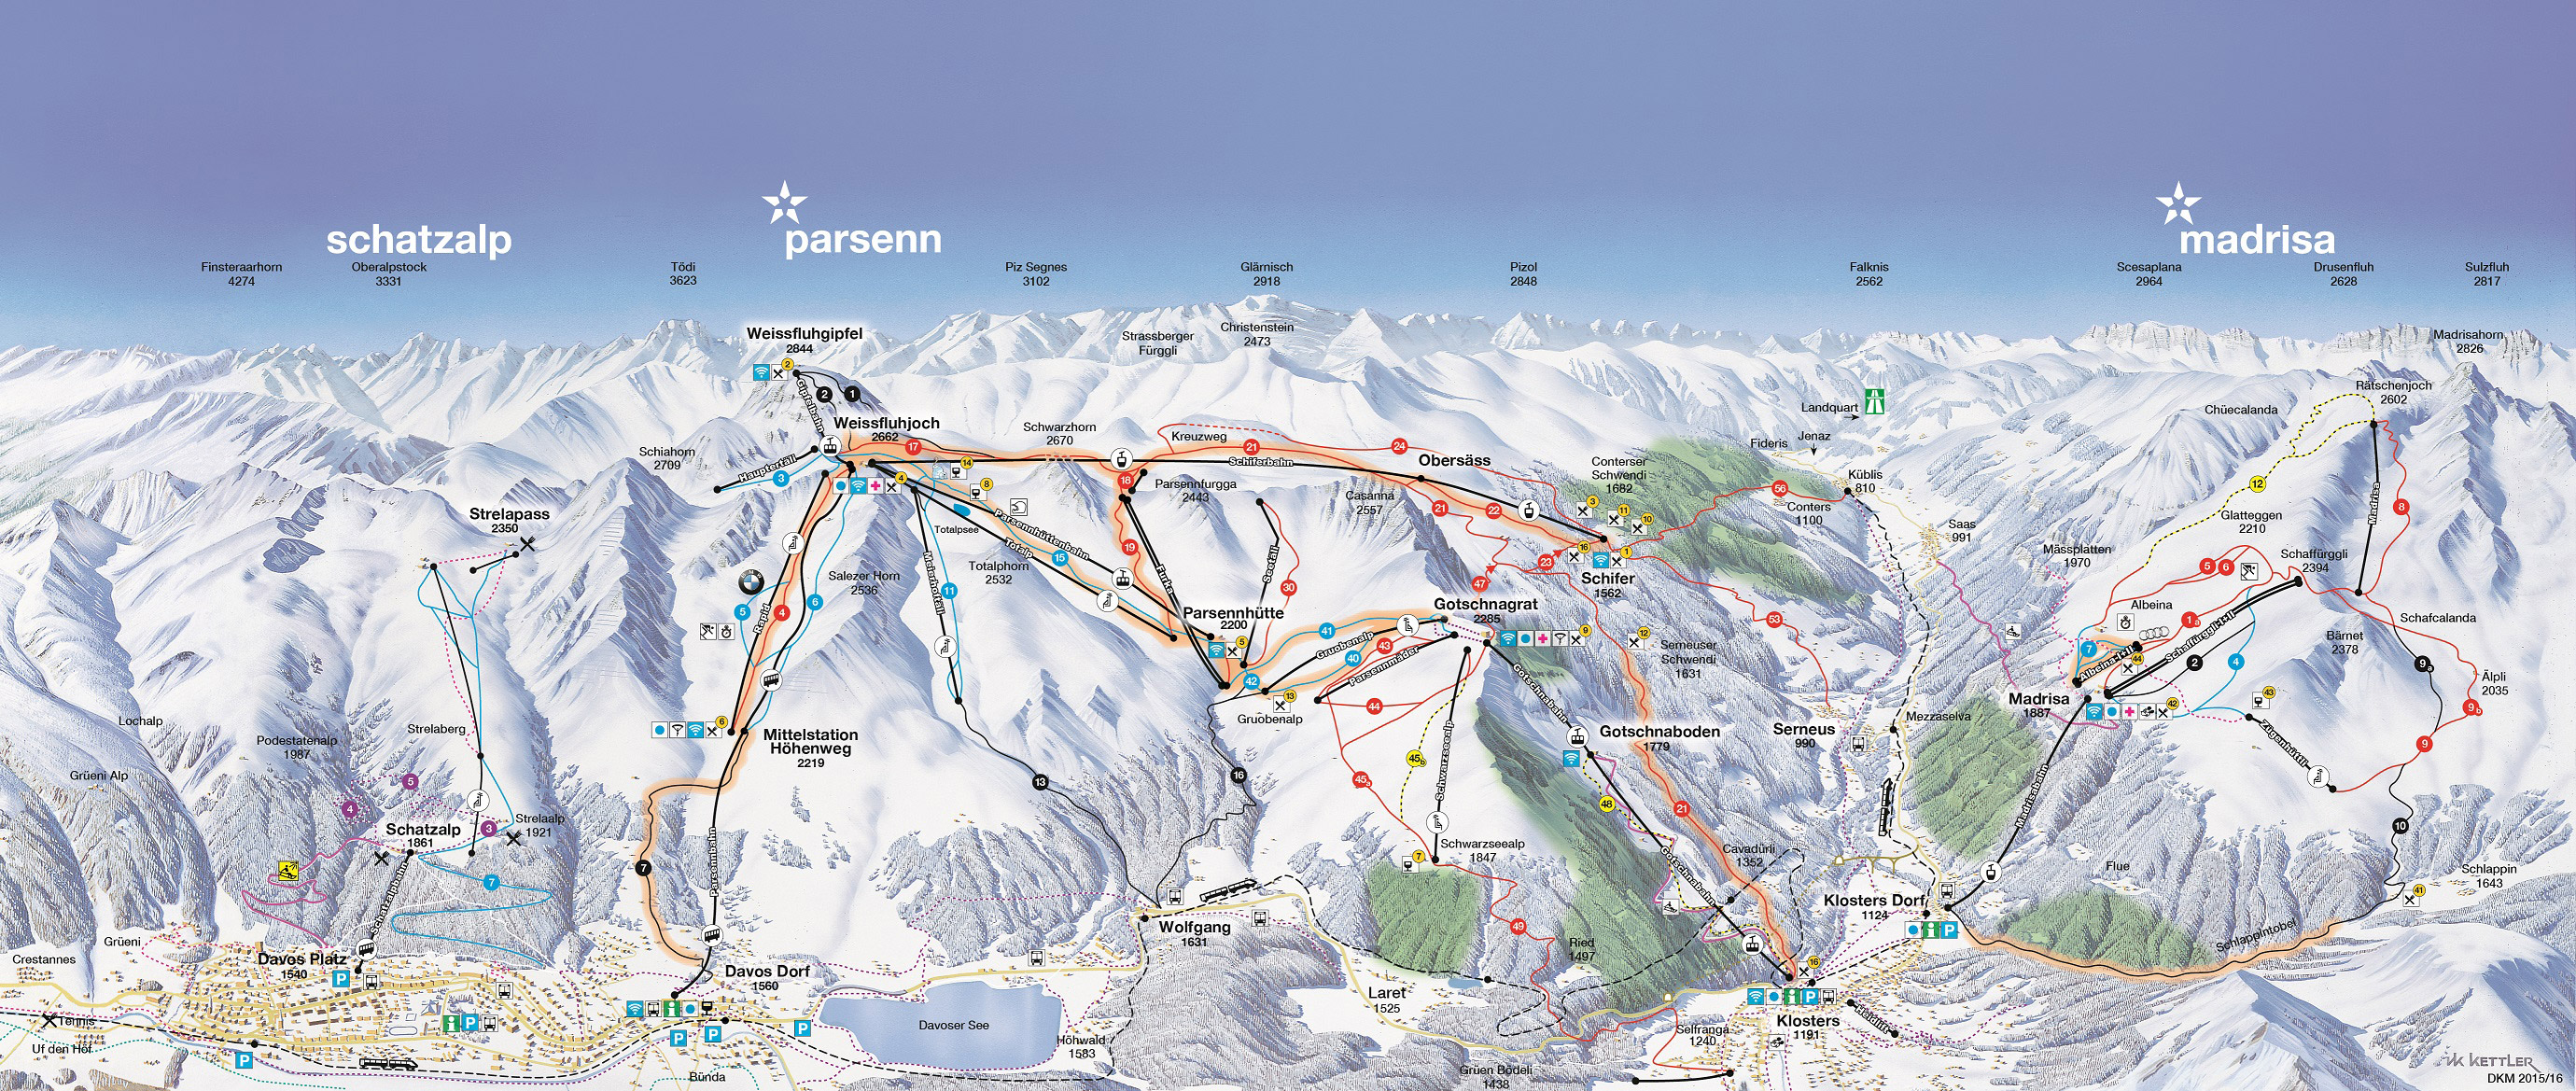 Davos Klosters Piste Map Free Downloadable Piste Maps within Brilliant  how to ski davos intended for Dream